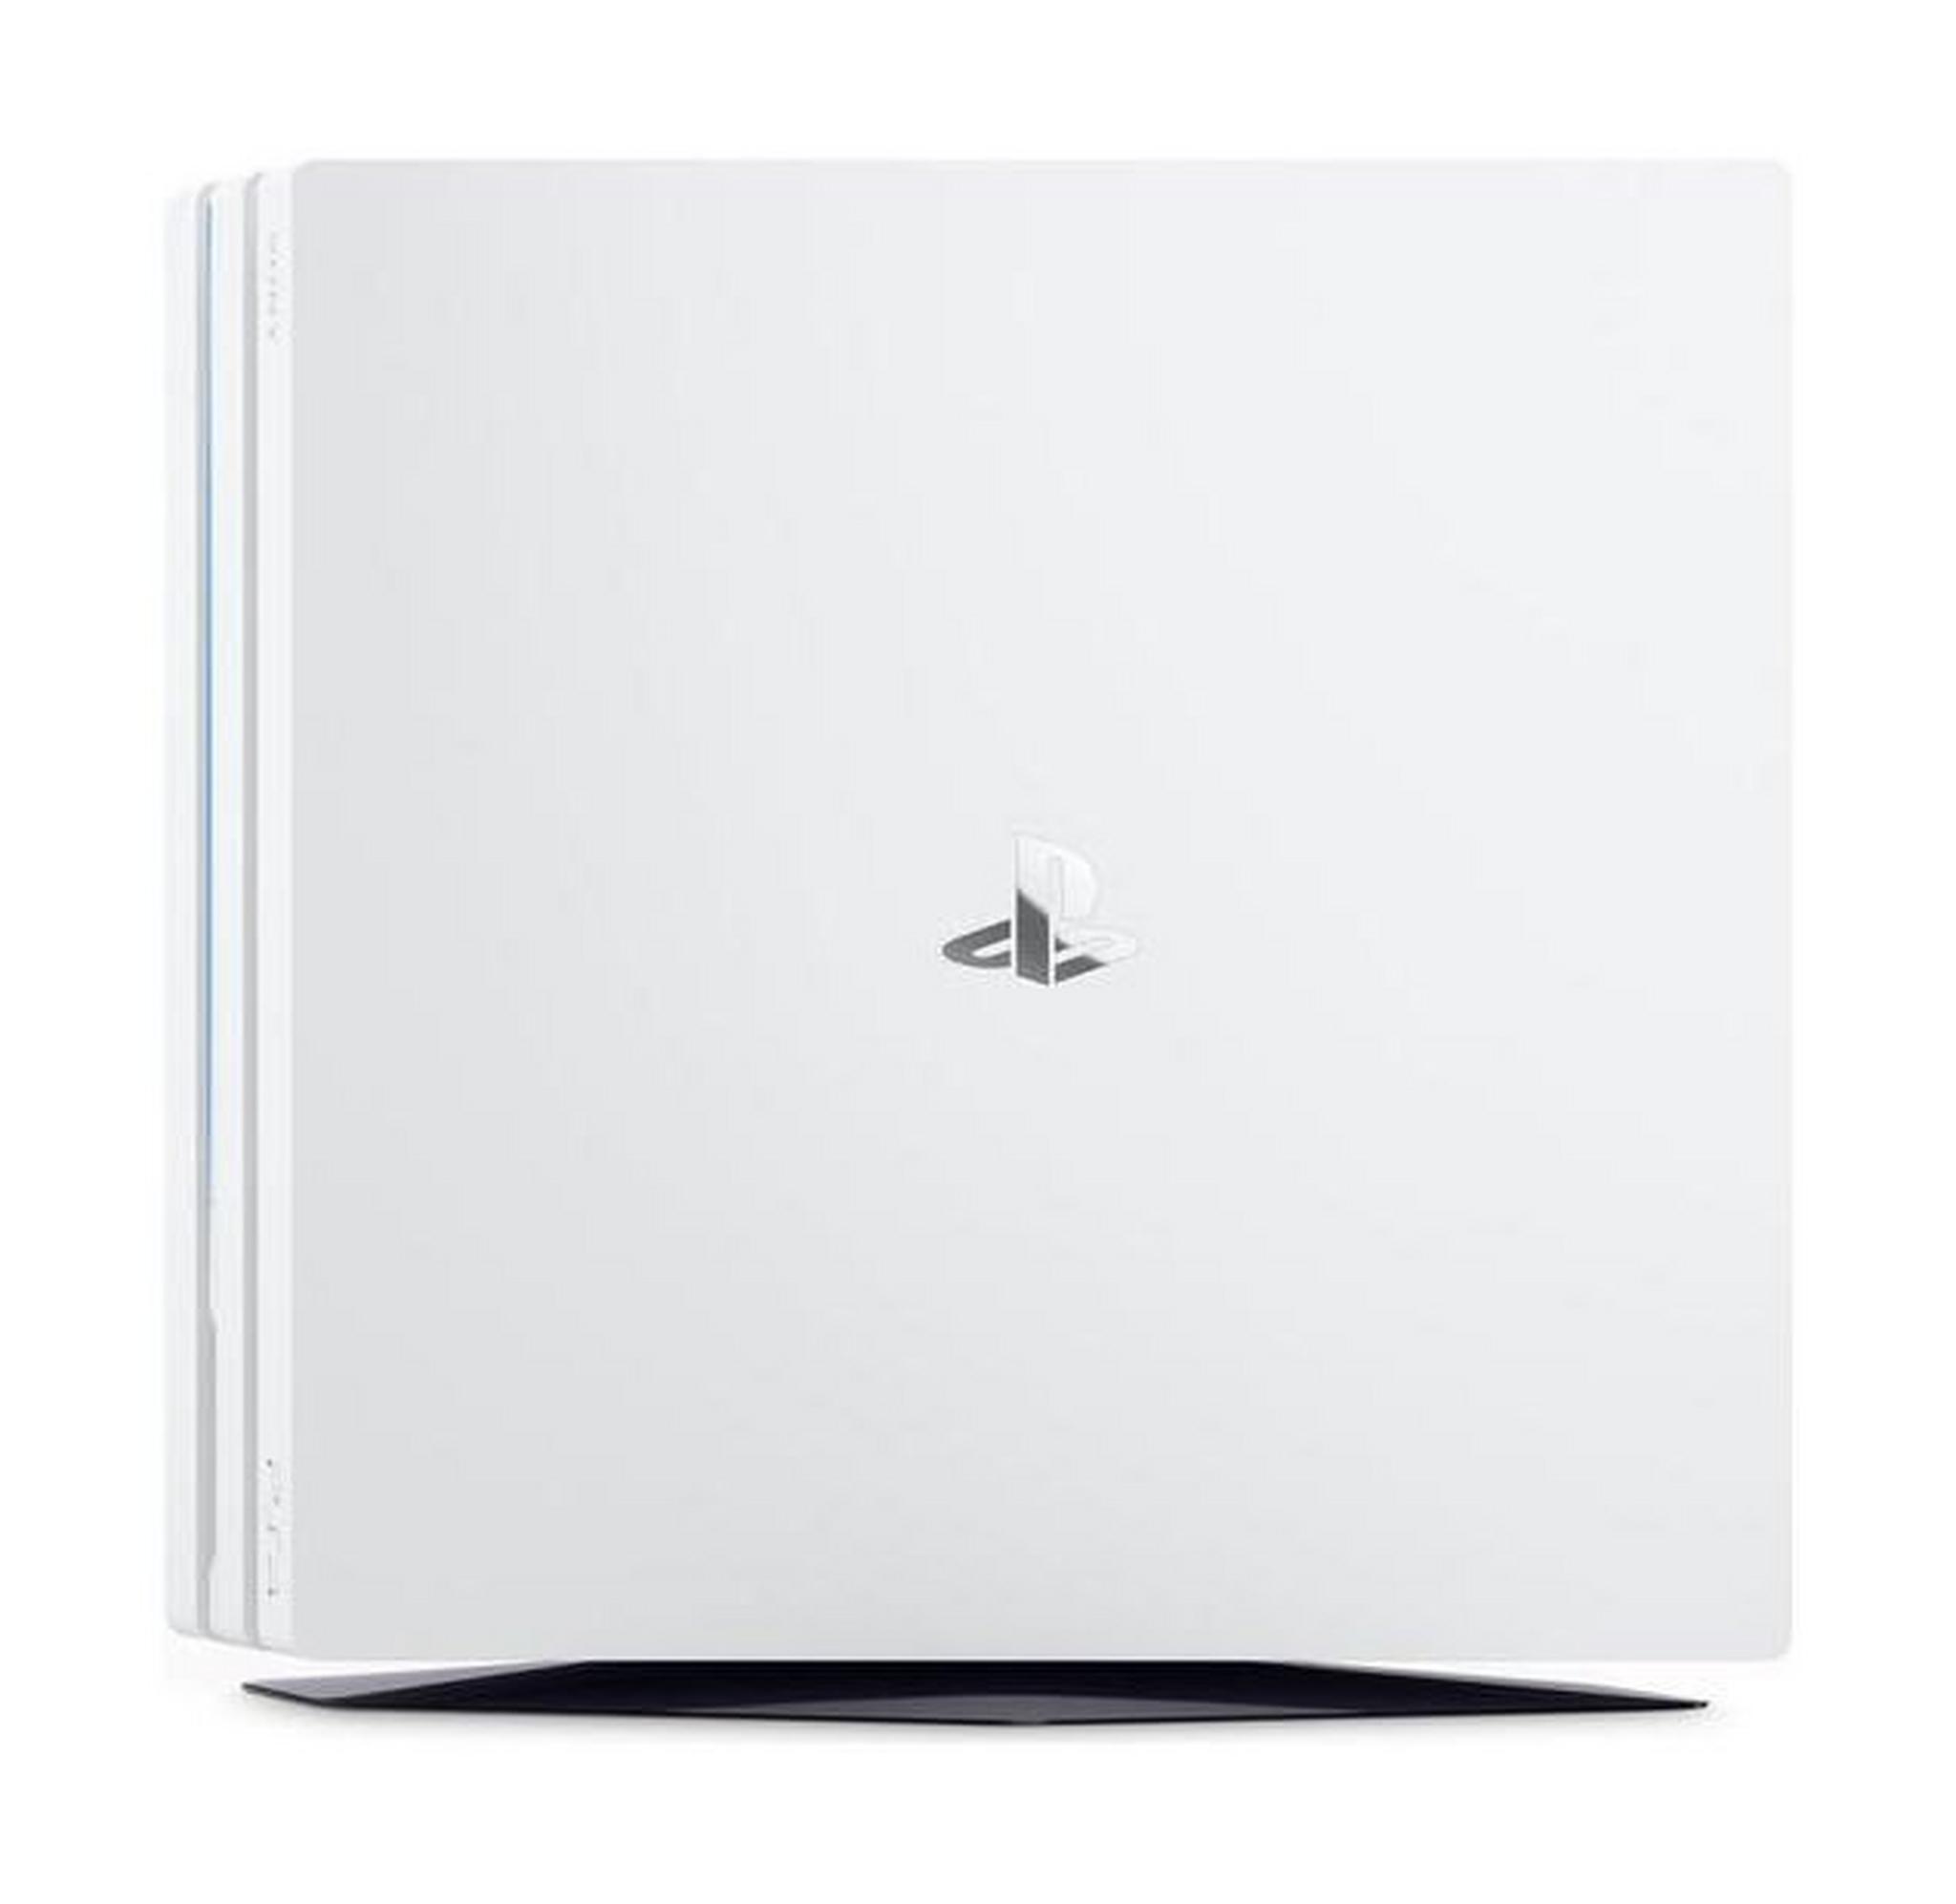 Sony PlayStation 4 Pro 1TB Gaming Console - White